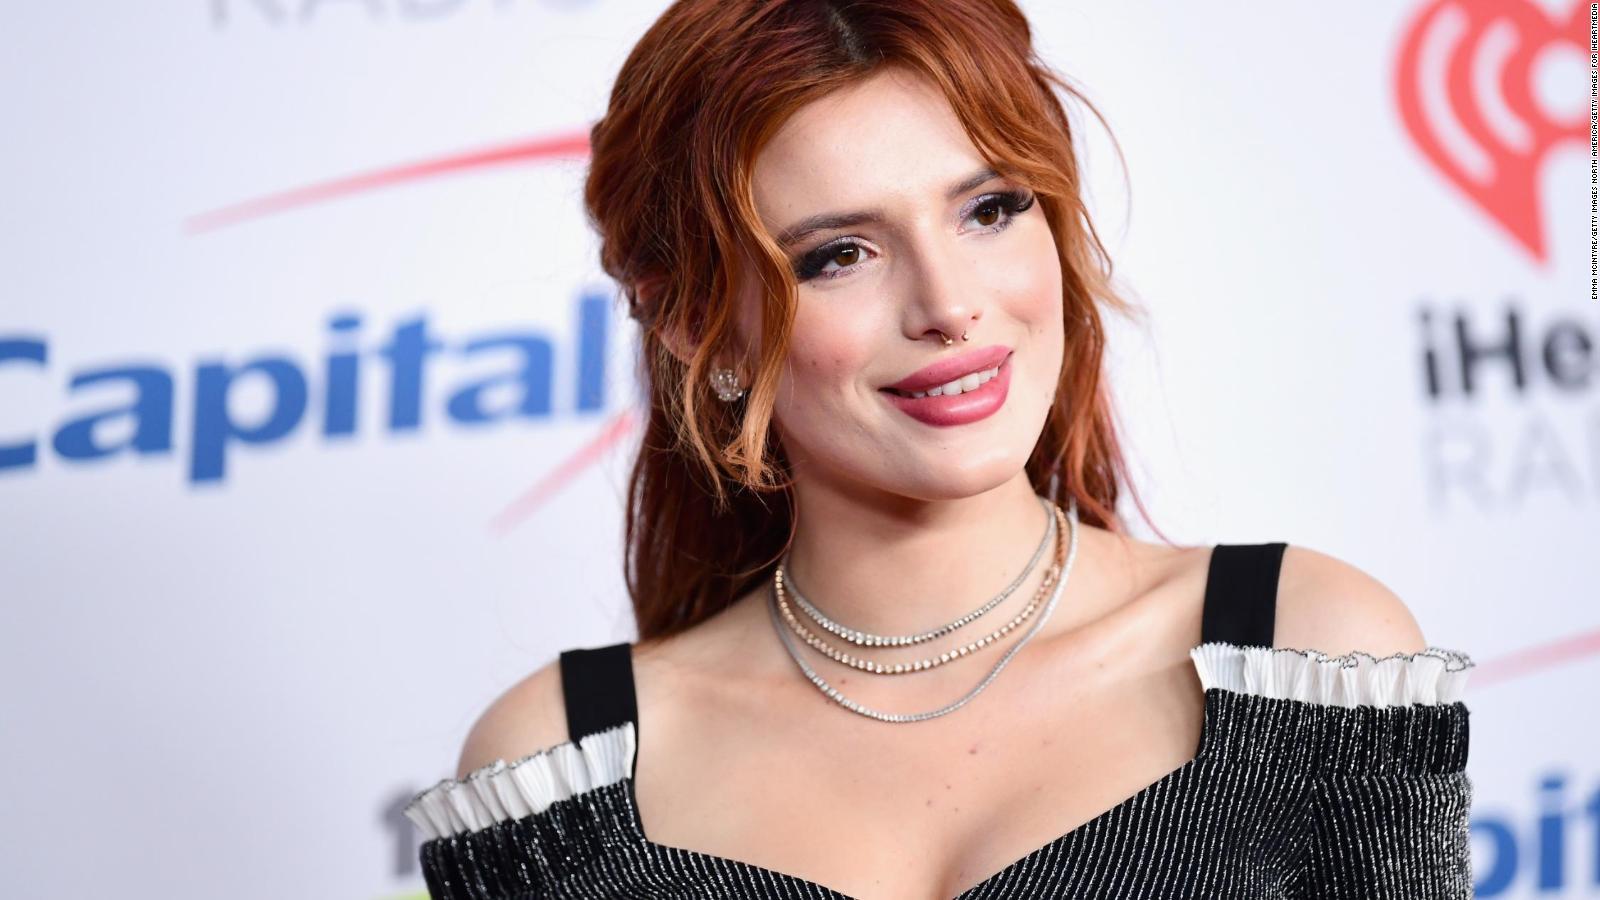 Bella Thorne shares nude photos on Twitter after a hacker threatened.